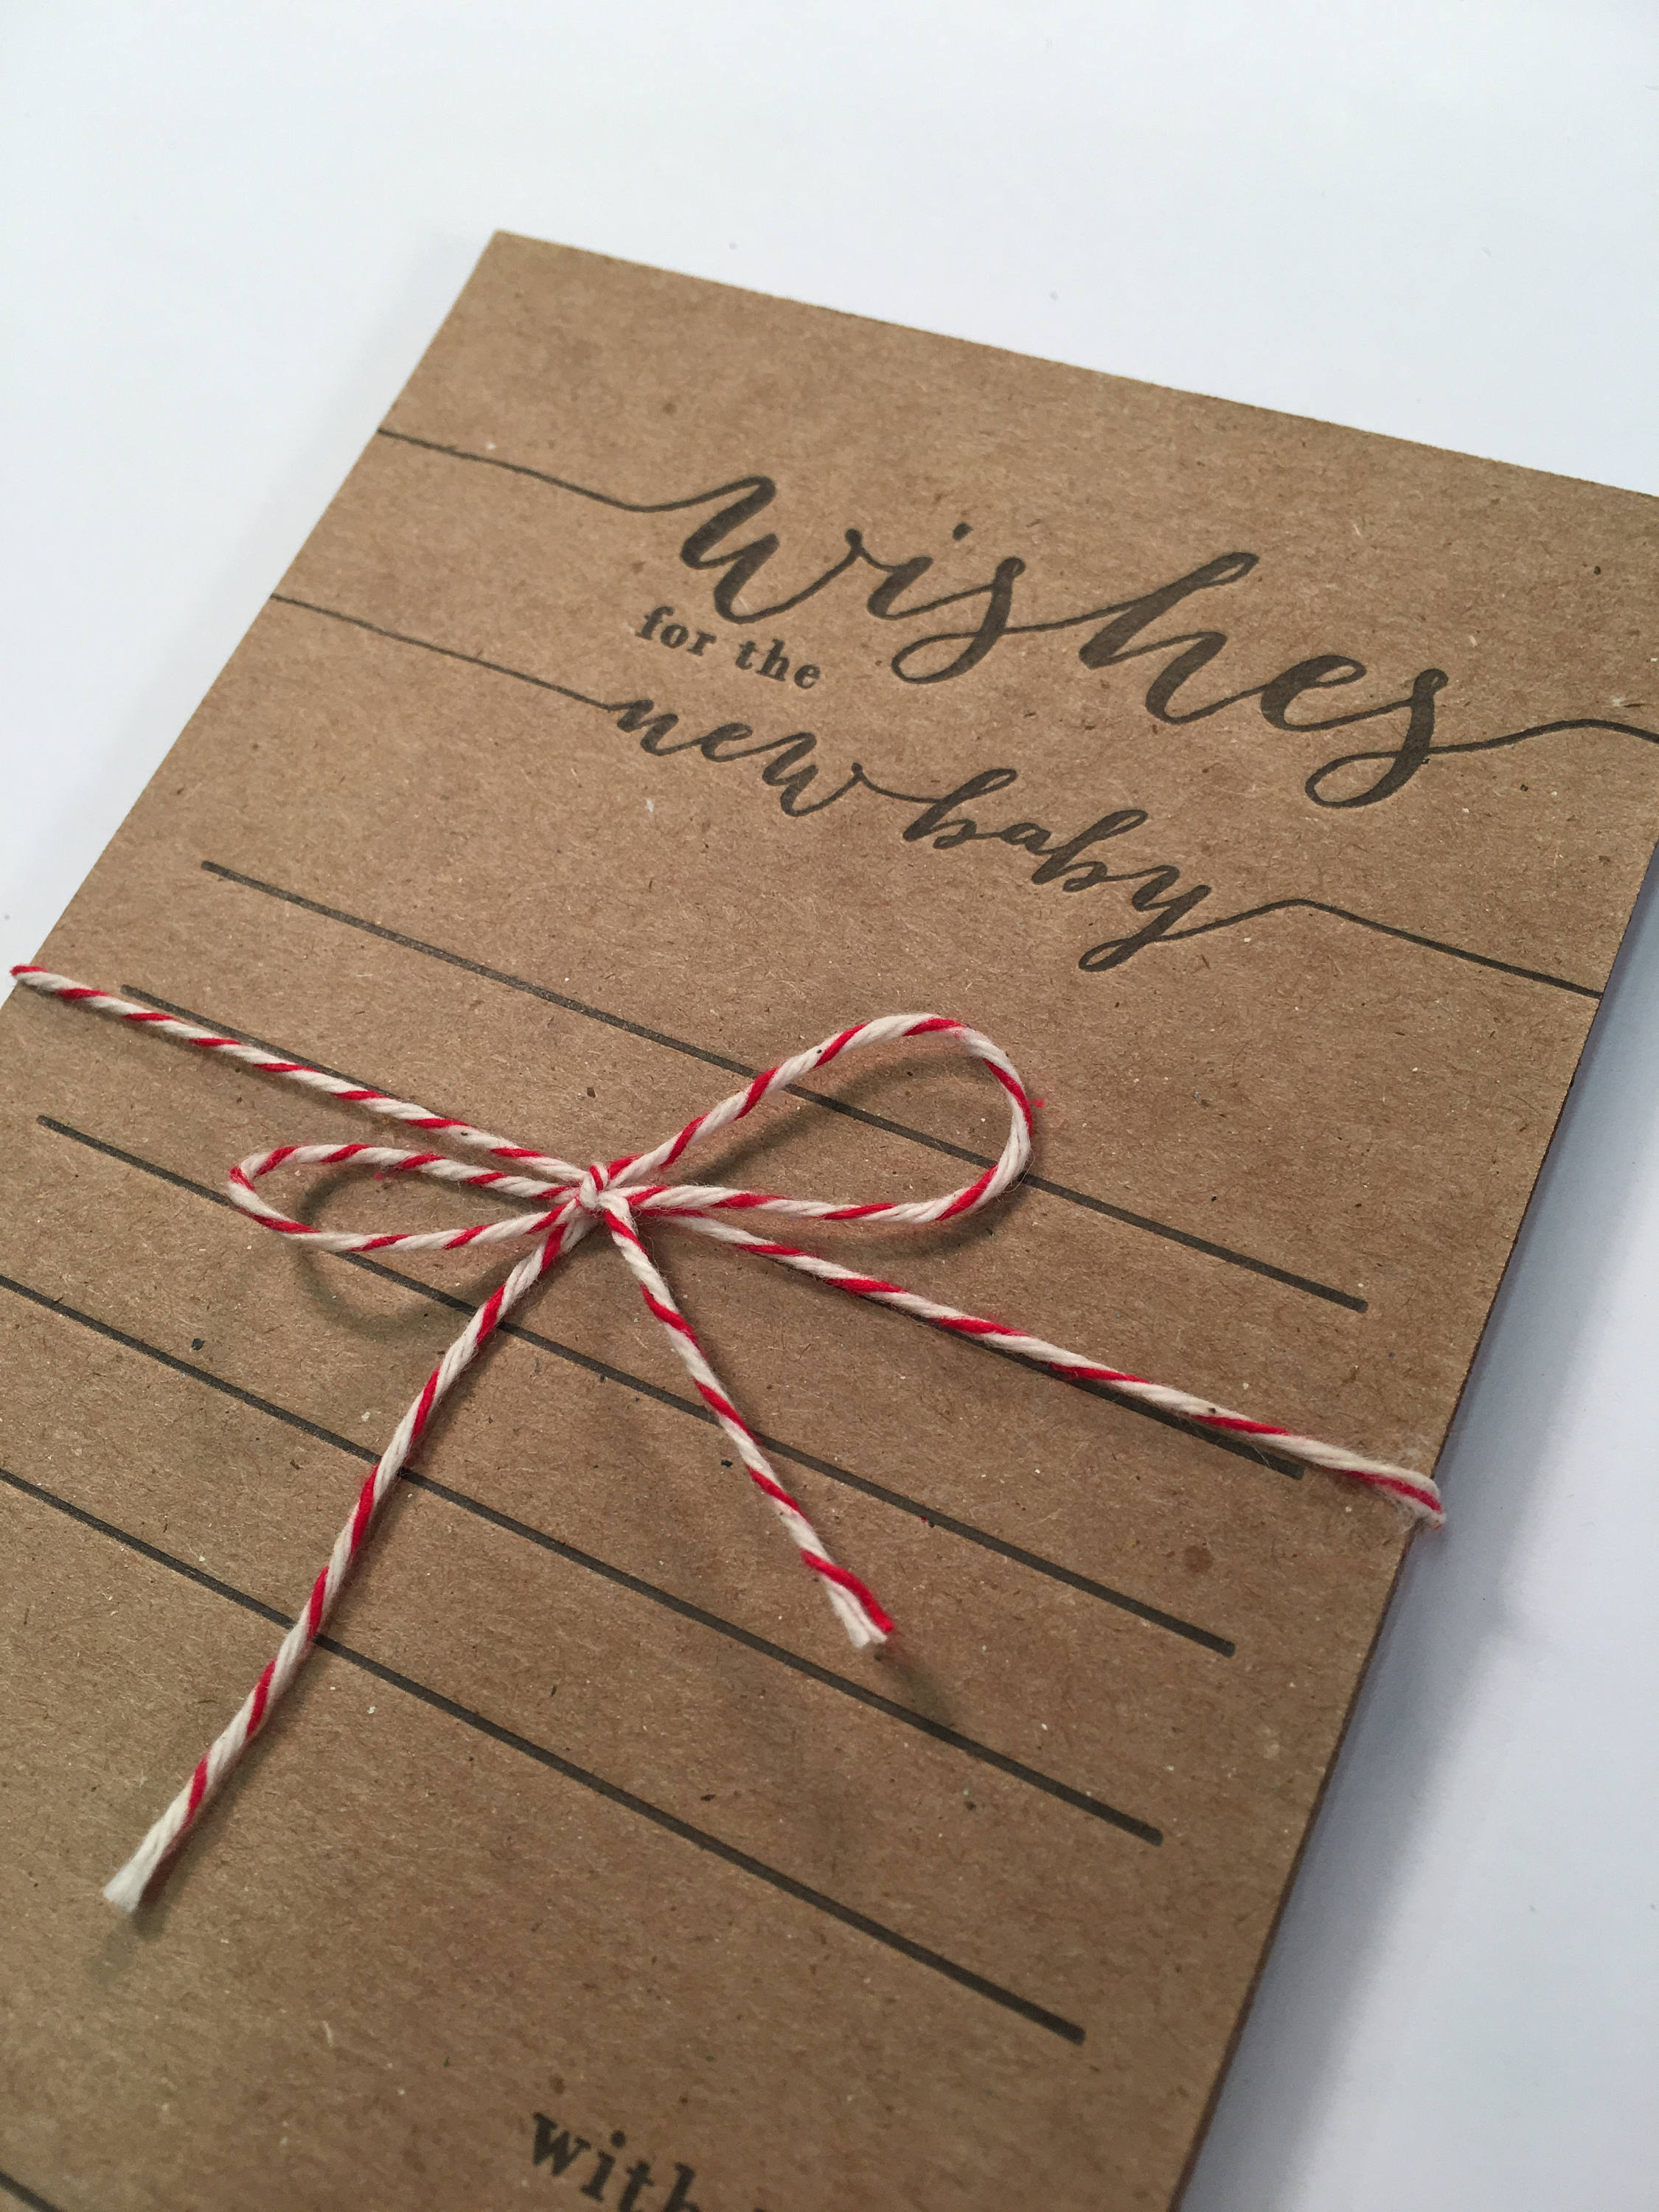 Wishes For The New Baby Letterpress Note Cards